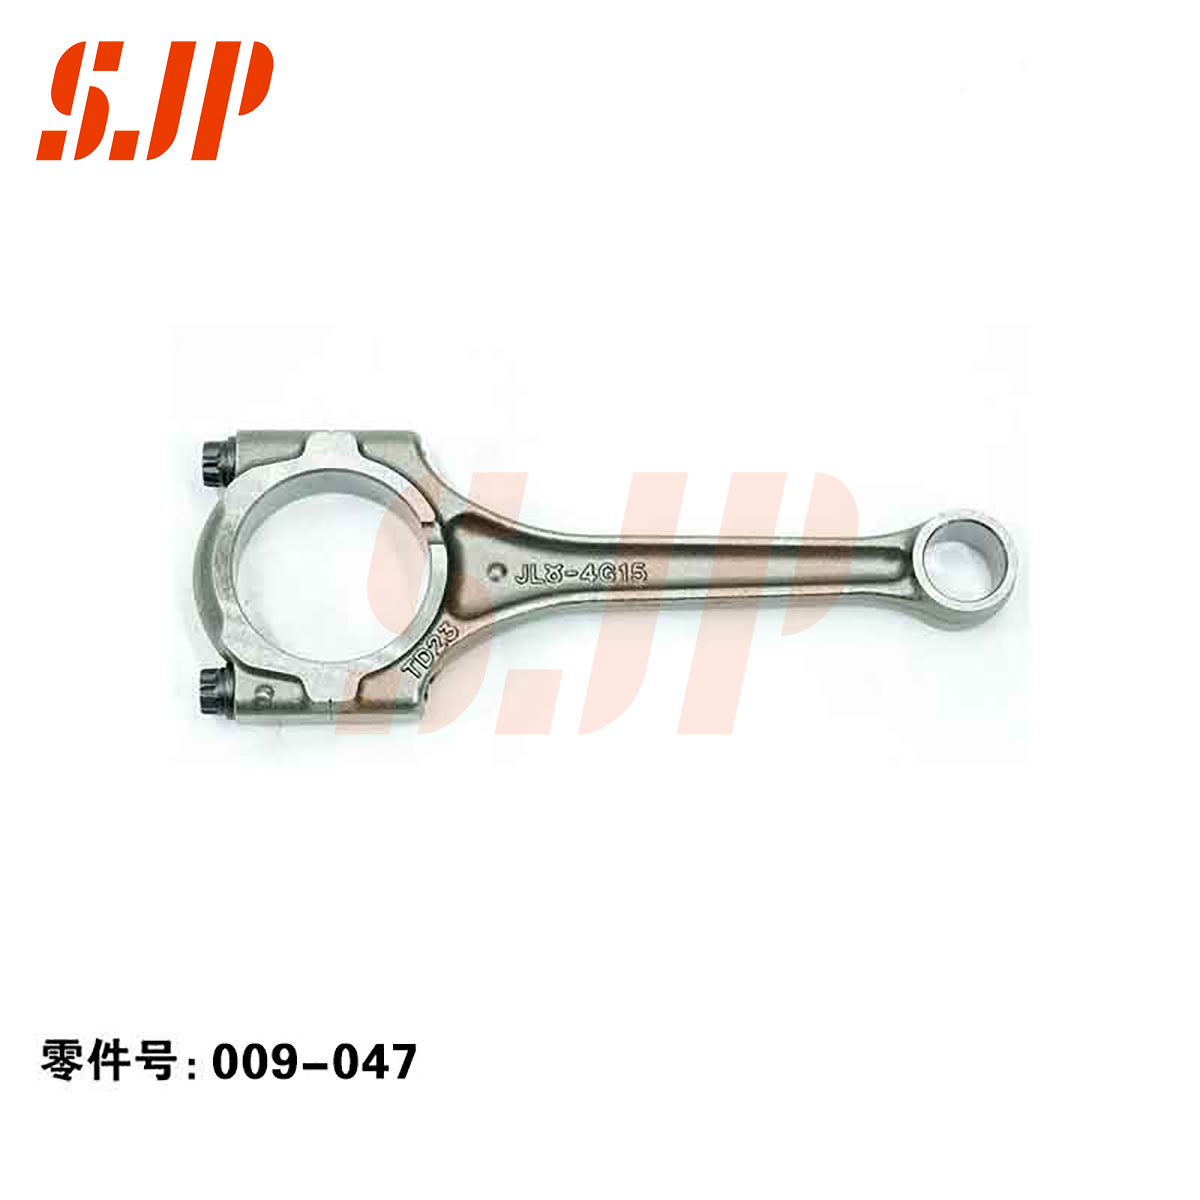 SJ-009-047 Connecting Rod For Geely 4G15DVVT